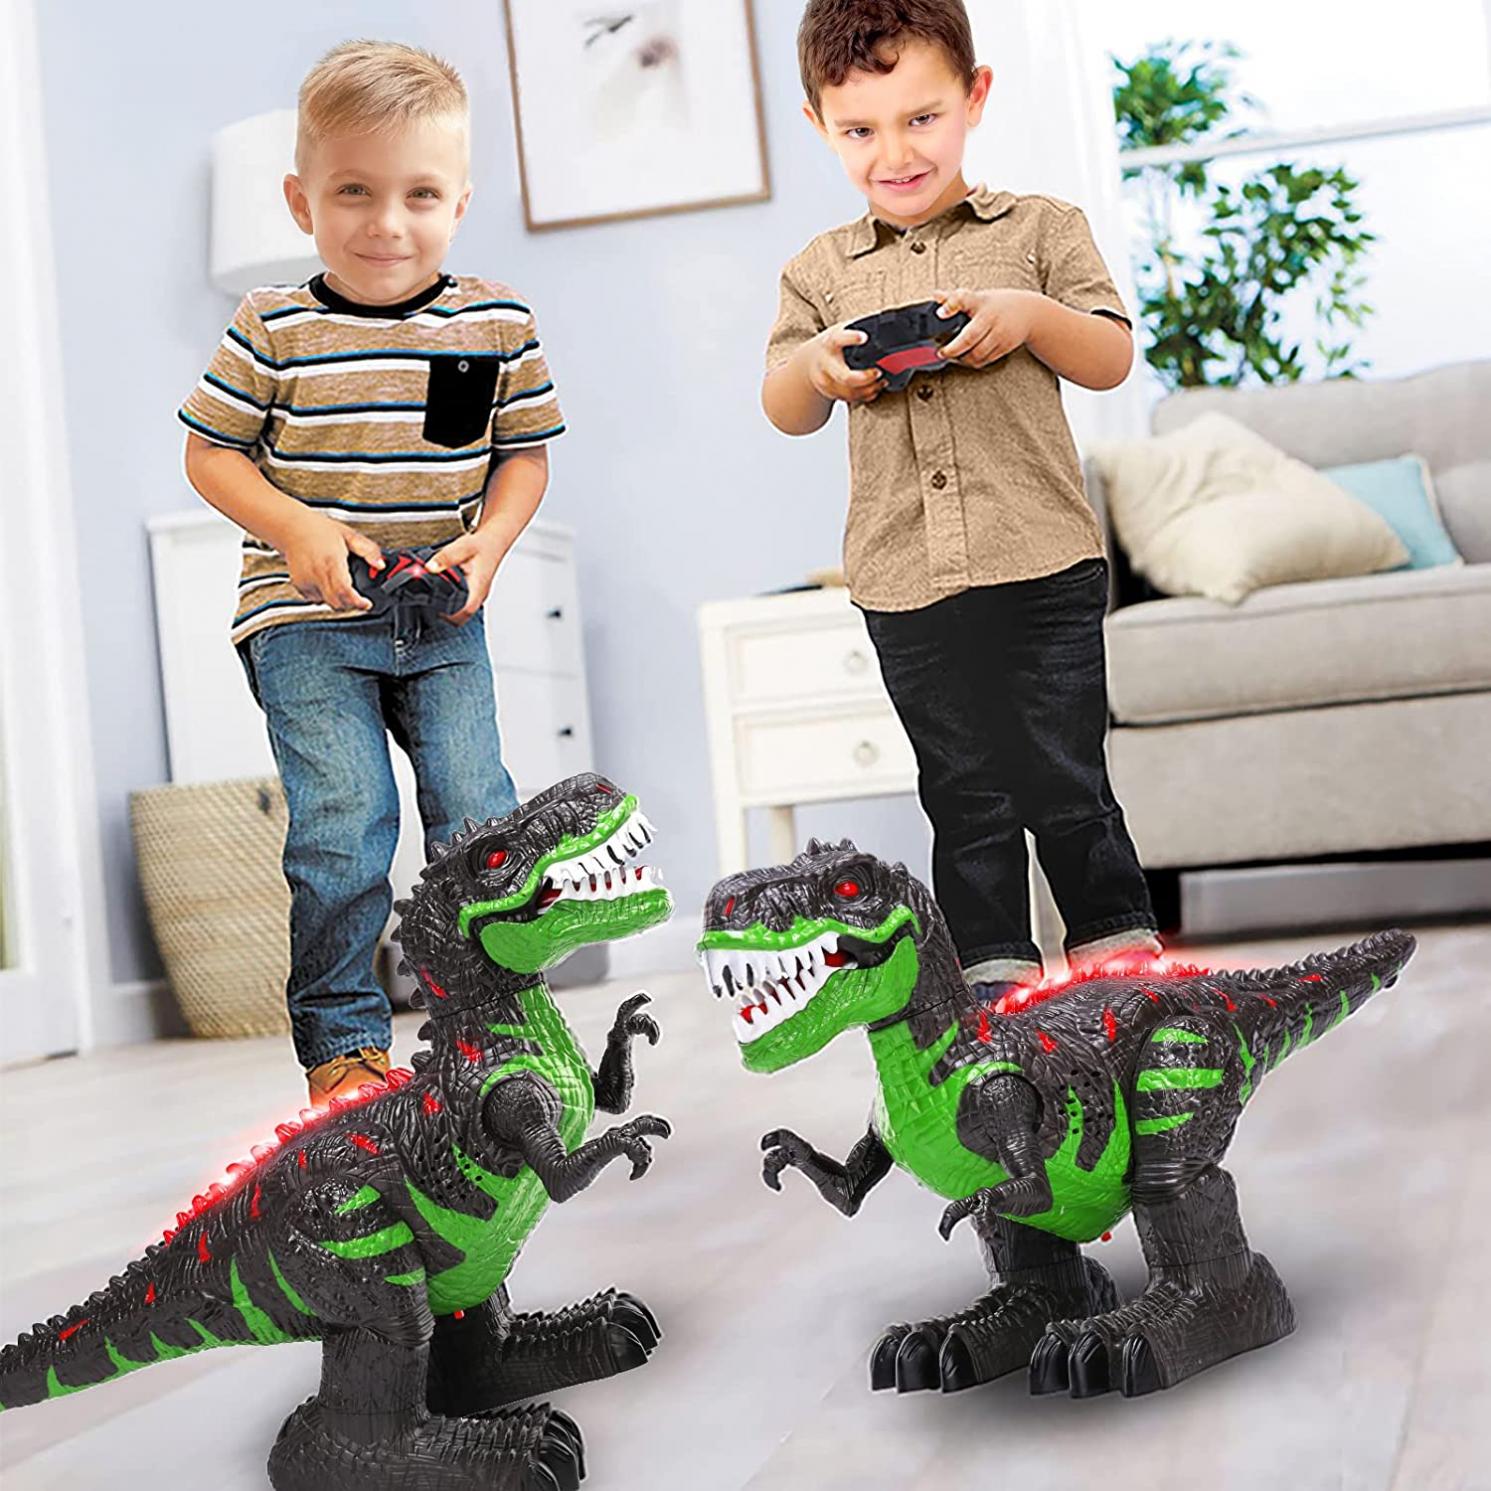 TEMI 8 Channels 2.4G Remote Control Dinosaur Toys for Kids 3 4 5 6 7 Years, Electric Stunt RC Walking T- Rex Toy with Lights and Sounds Powered by Rechargeable Battery, Gifts for Boys Girls